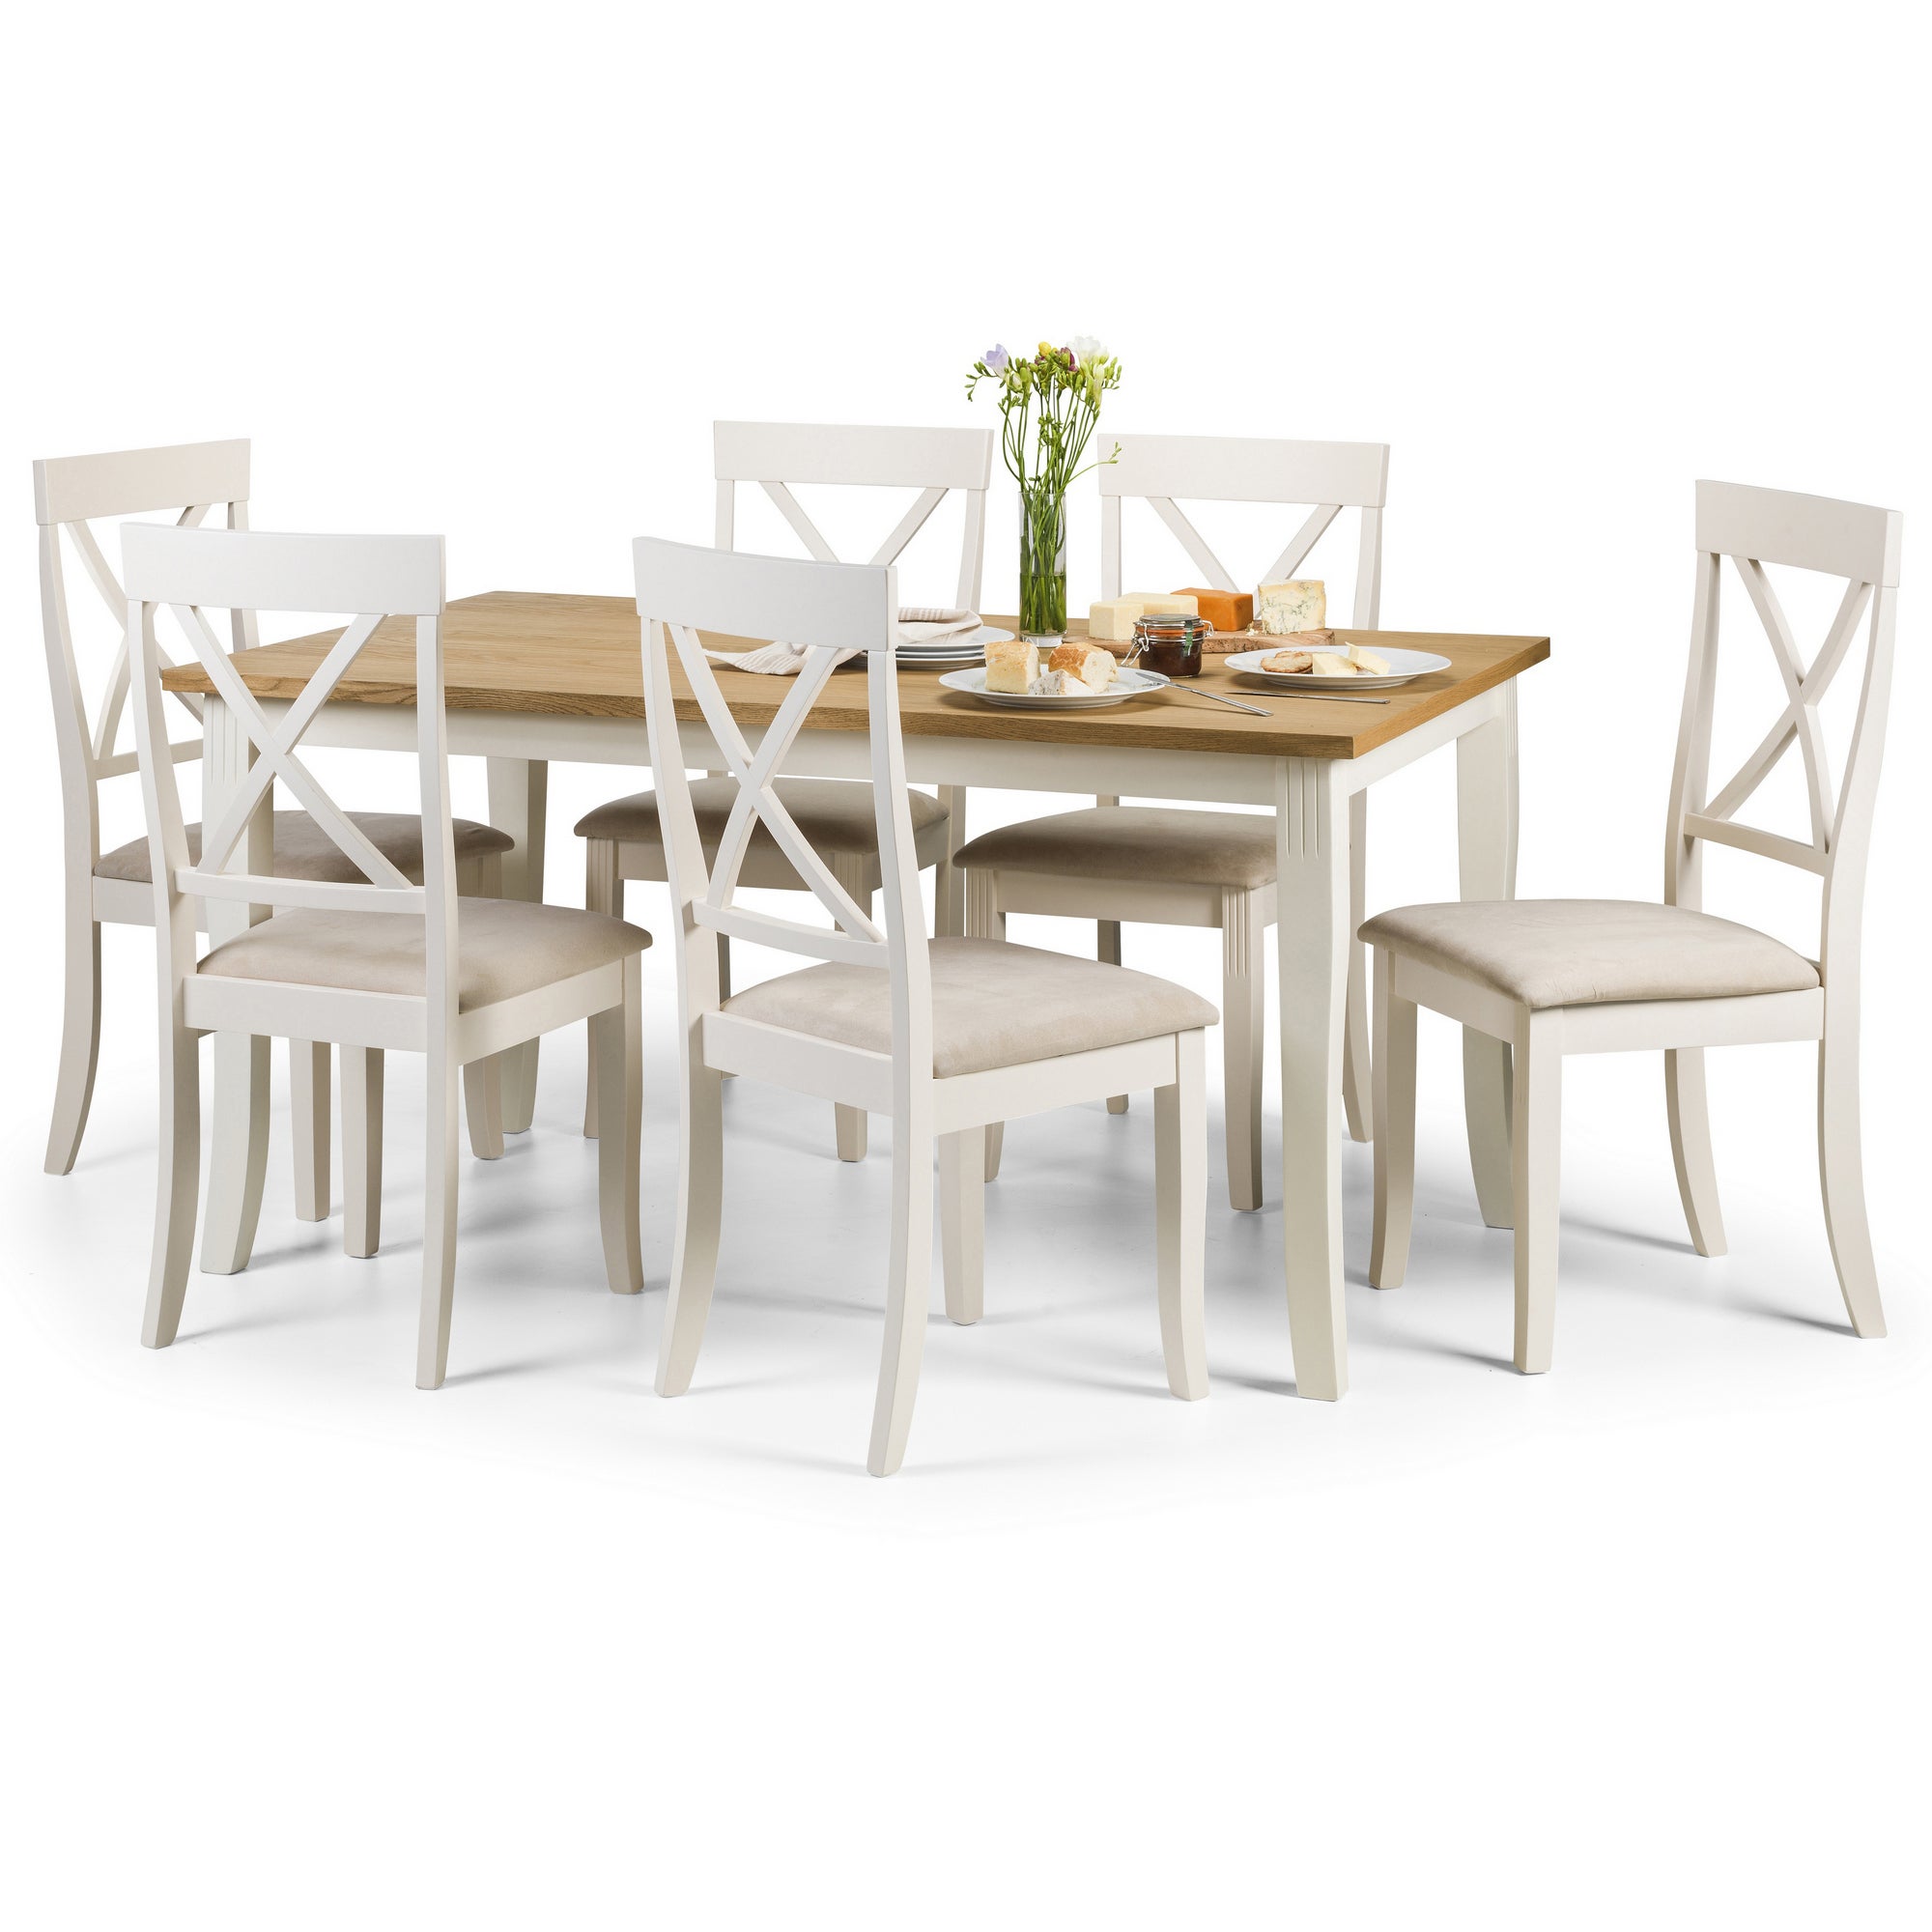 Davenport Rectangular Dining Table With 6 Chairs Off White Cream And Brown